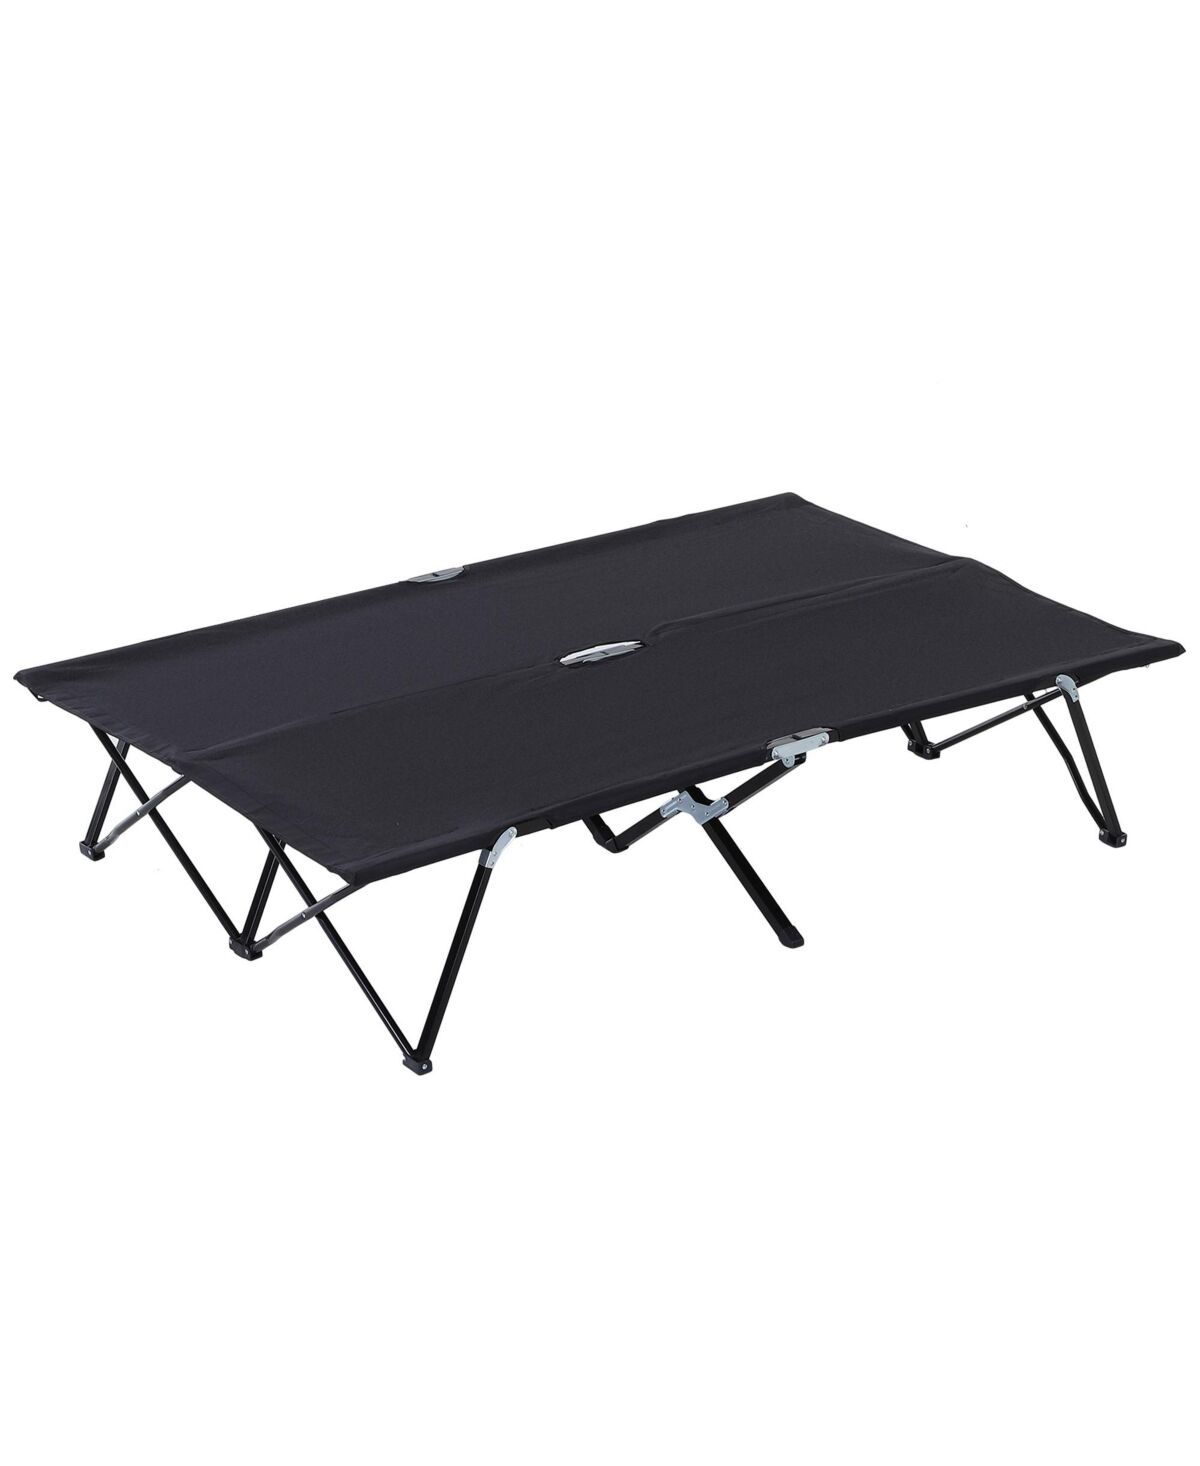 Outsunny 2 Person Folding Camping Cot for Adults, Extra Wide Outdoor Portable Sleeping Cot with Carry Bag, Elevated Camping Bed, Beach Hiking, Black -